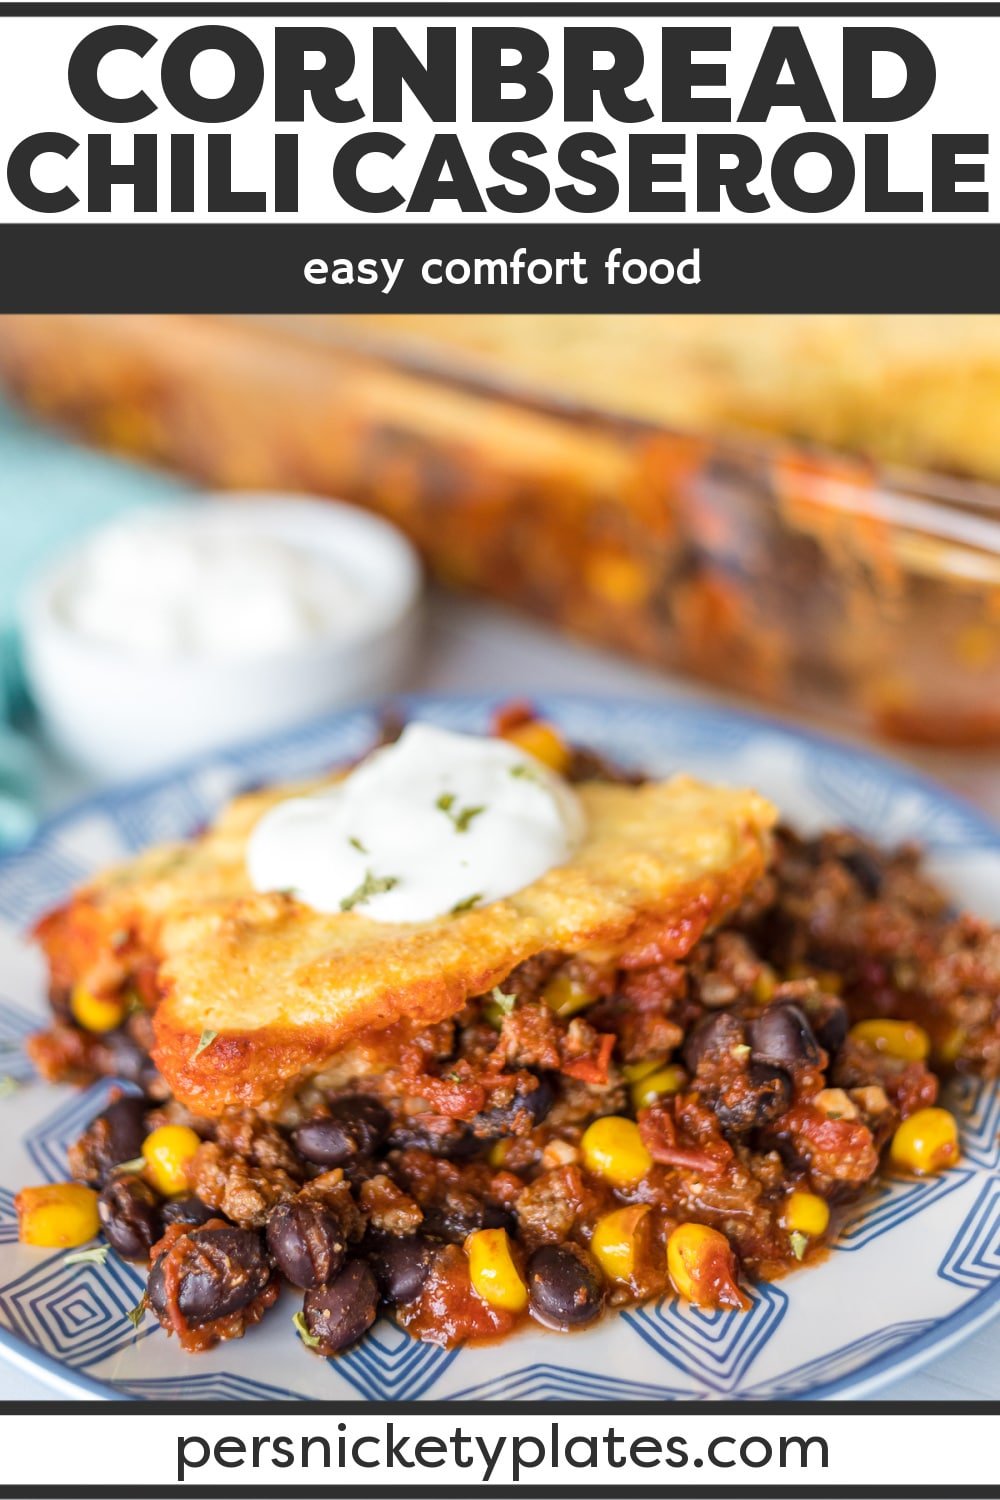 This chili cornbread casserole with Jiffy mix tastes like your mom’s chili but is topped with a layer of sweet and crispy cornbread. It’s the definition of Southern comfort food but super easy! | www.persnicketyplates.com